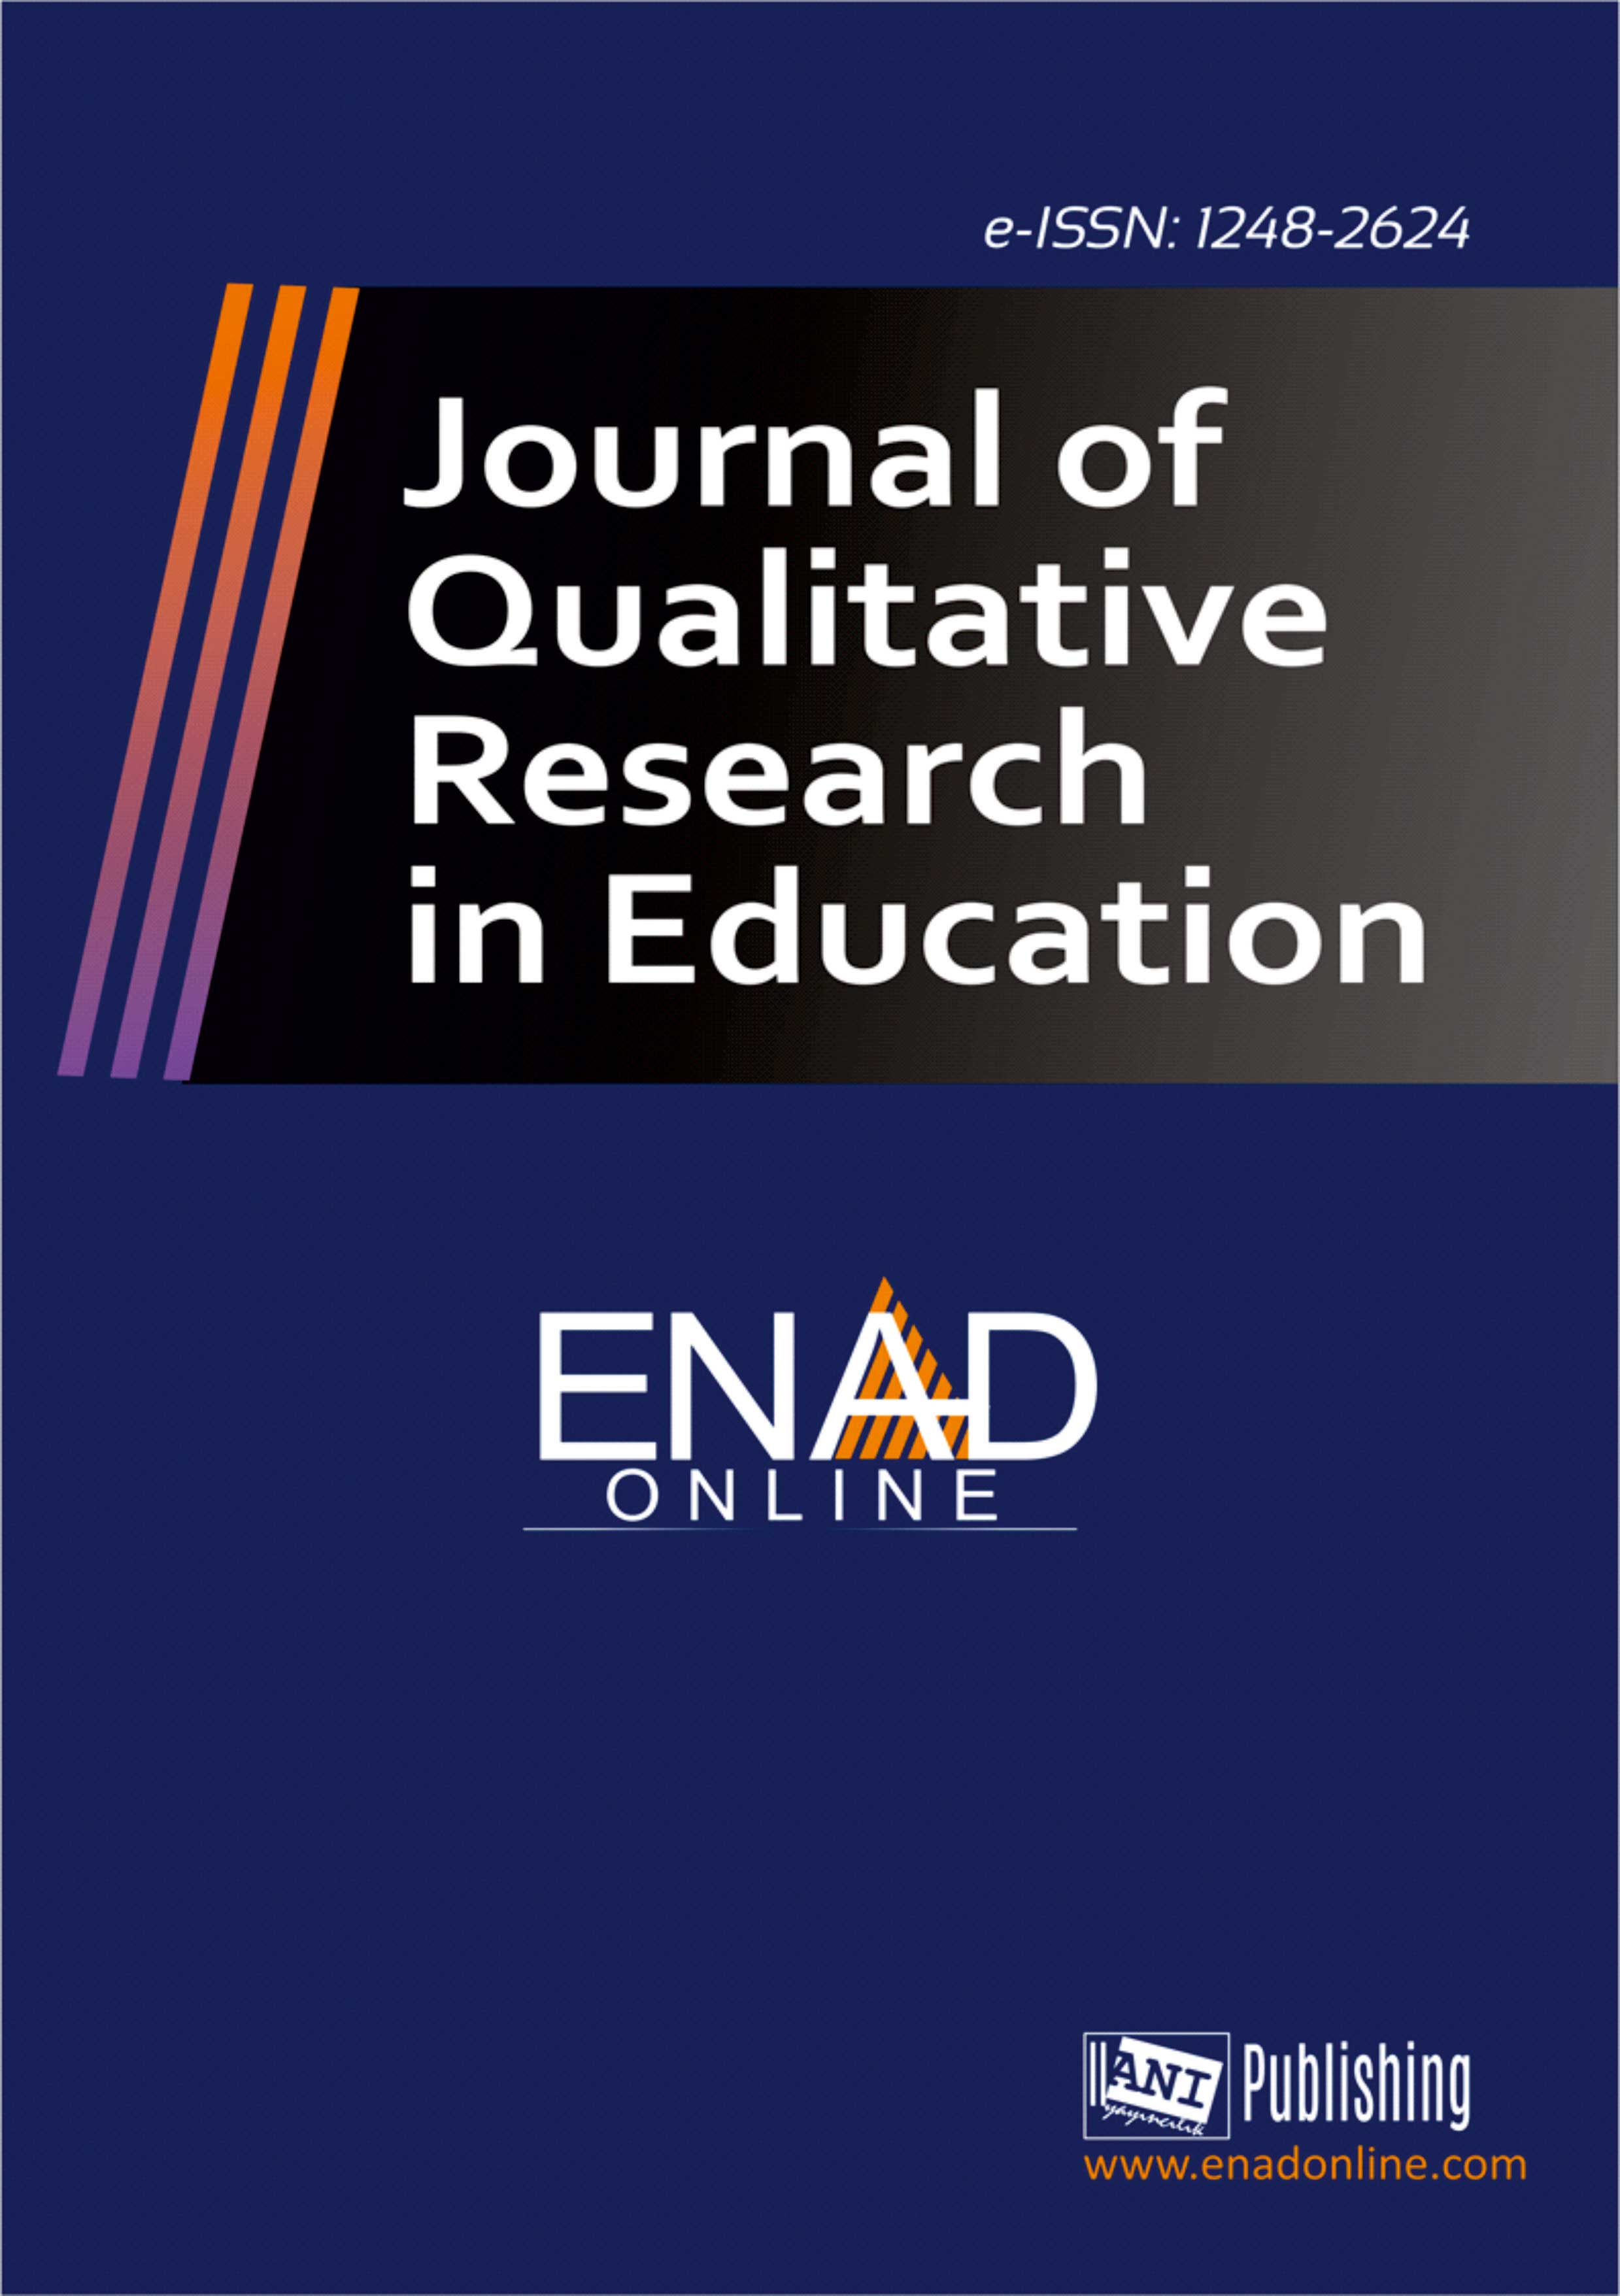 					View Vol. 6 Issue 1 (2018): Journal of Qualitative Research in Education
				